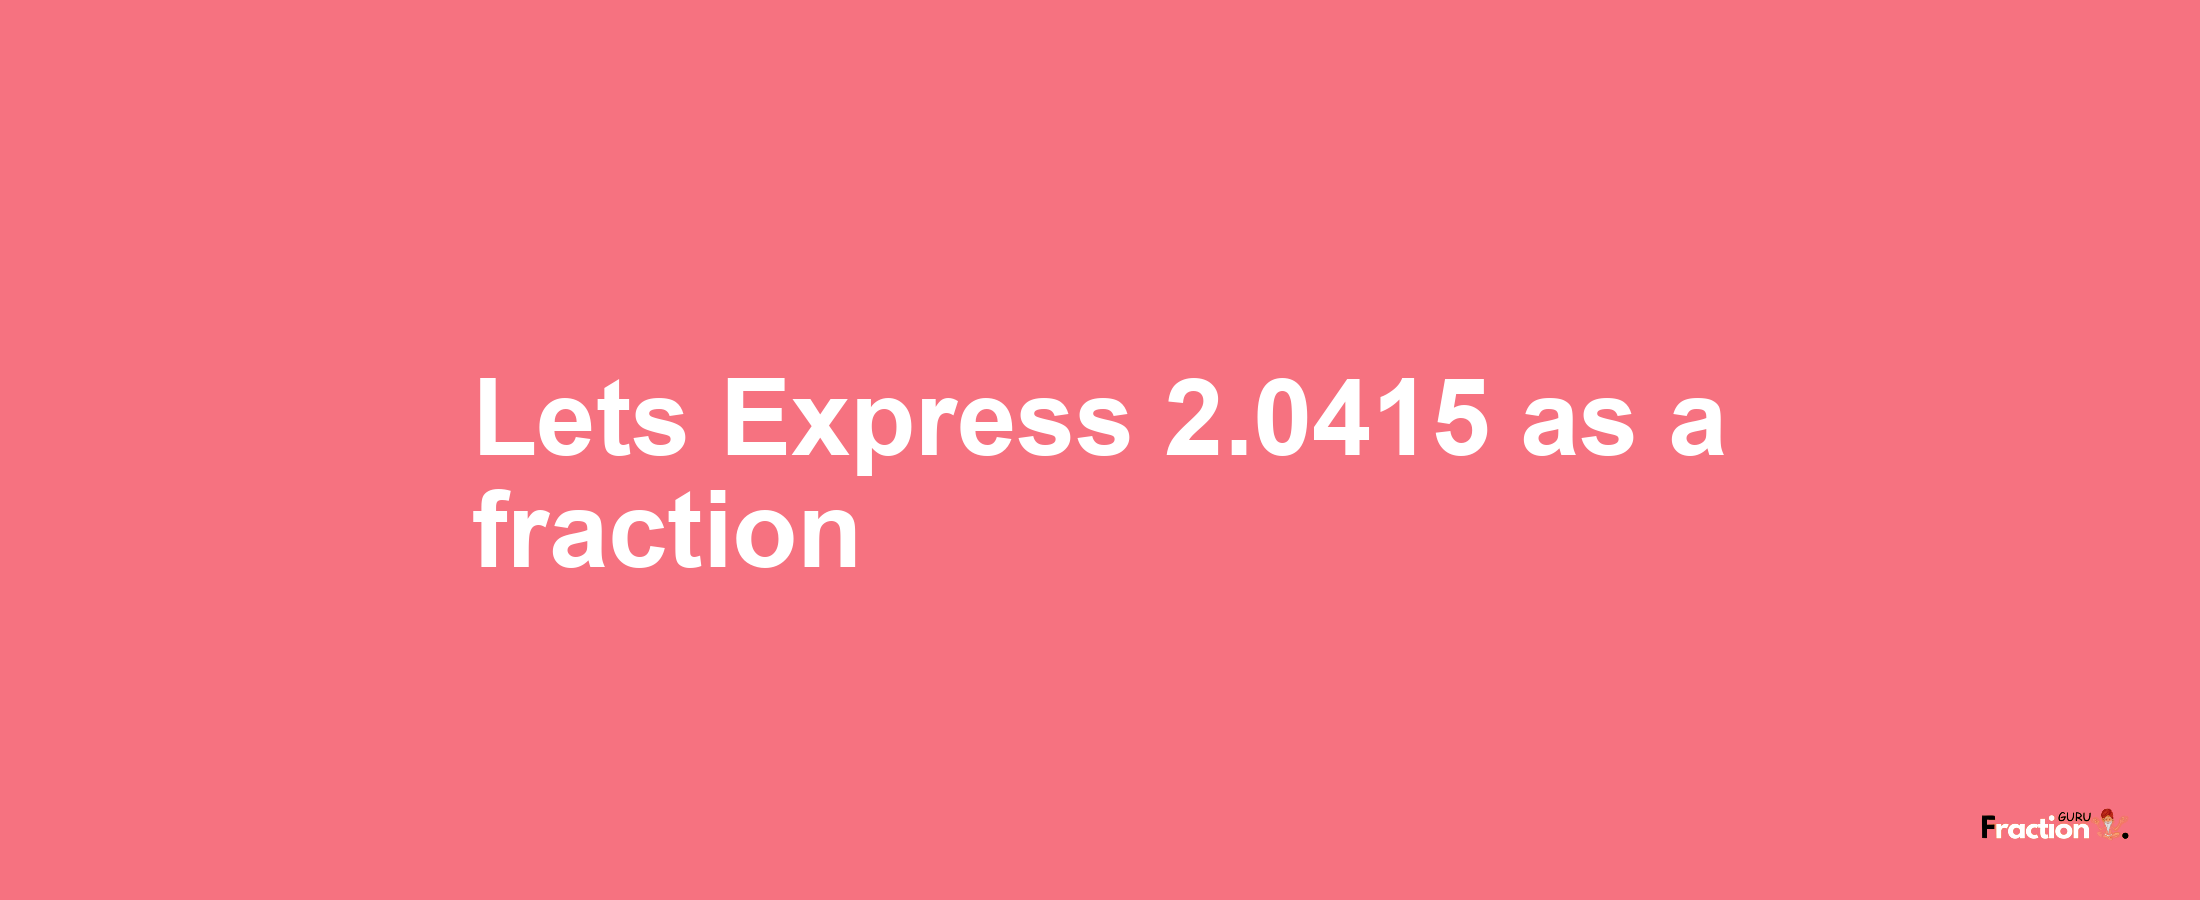 Lets Express 2.0415 as afraction